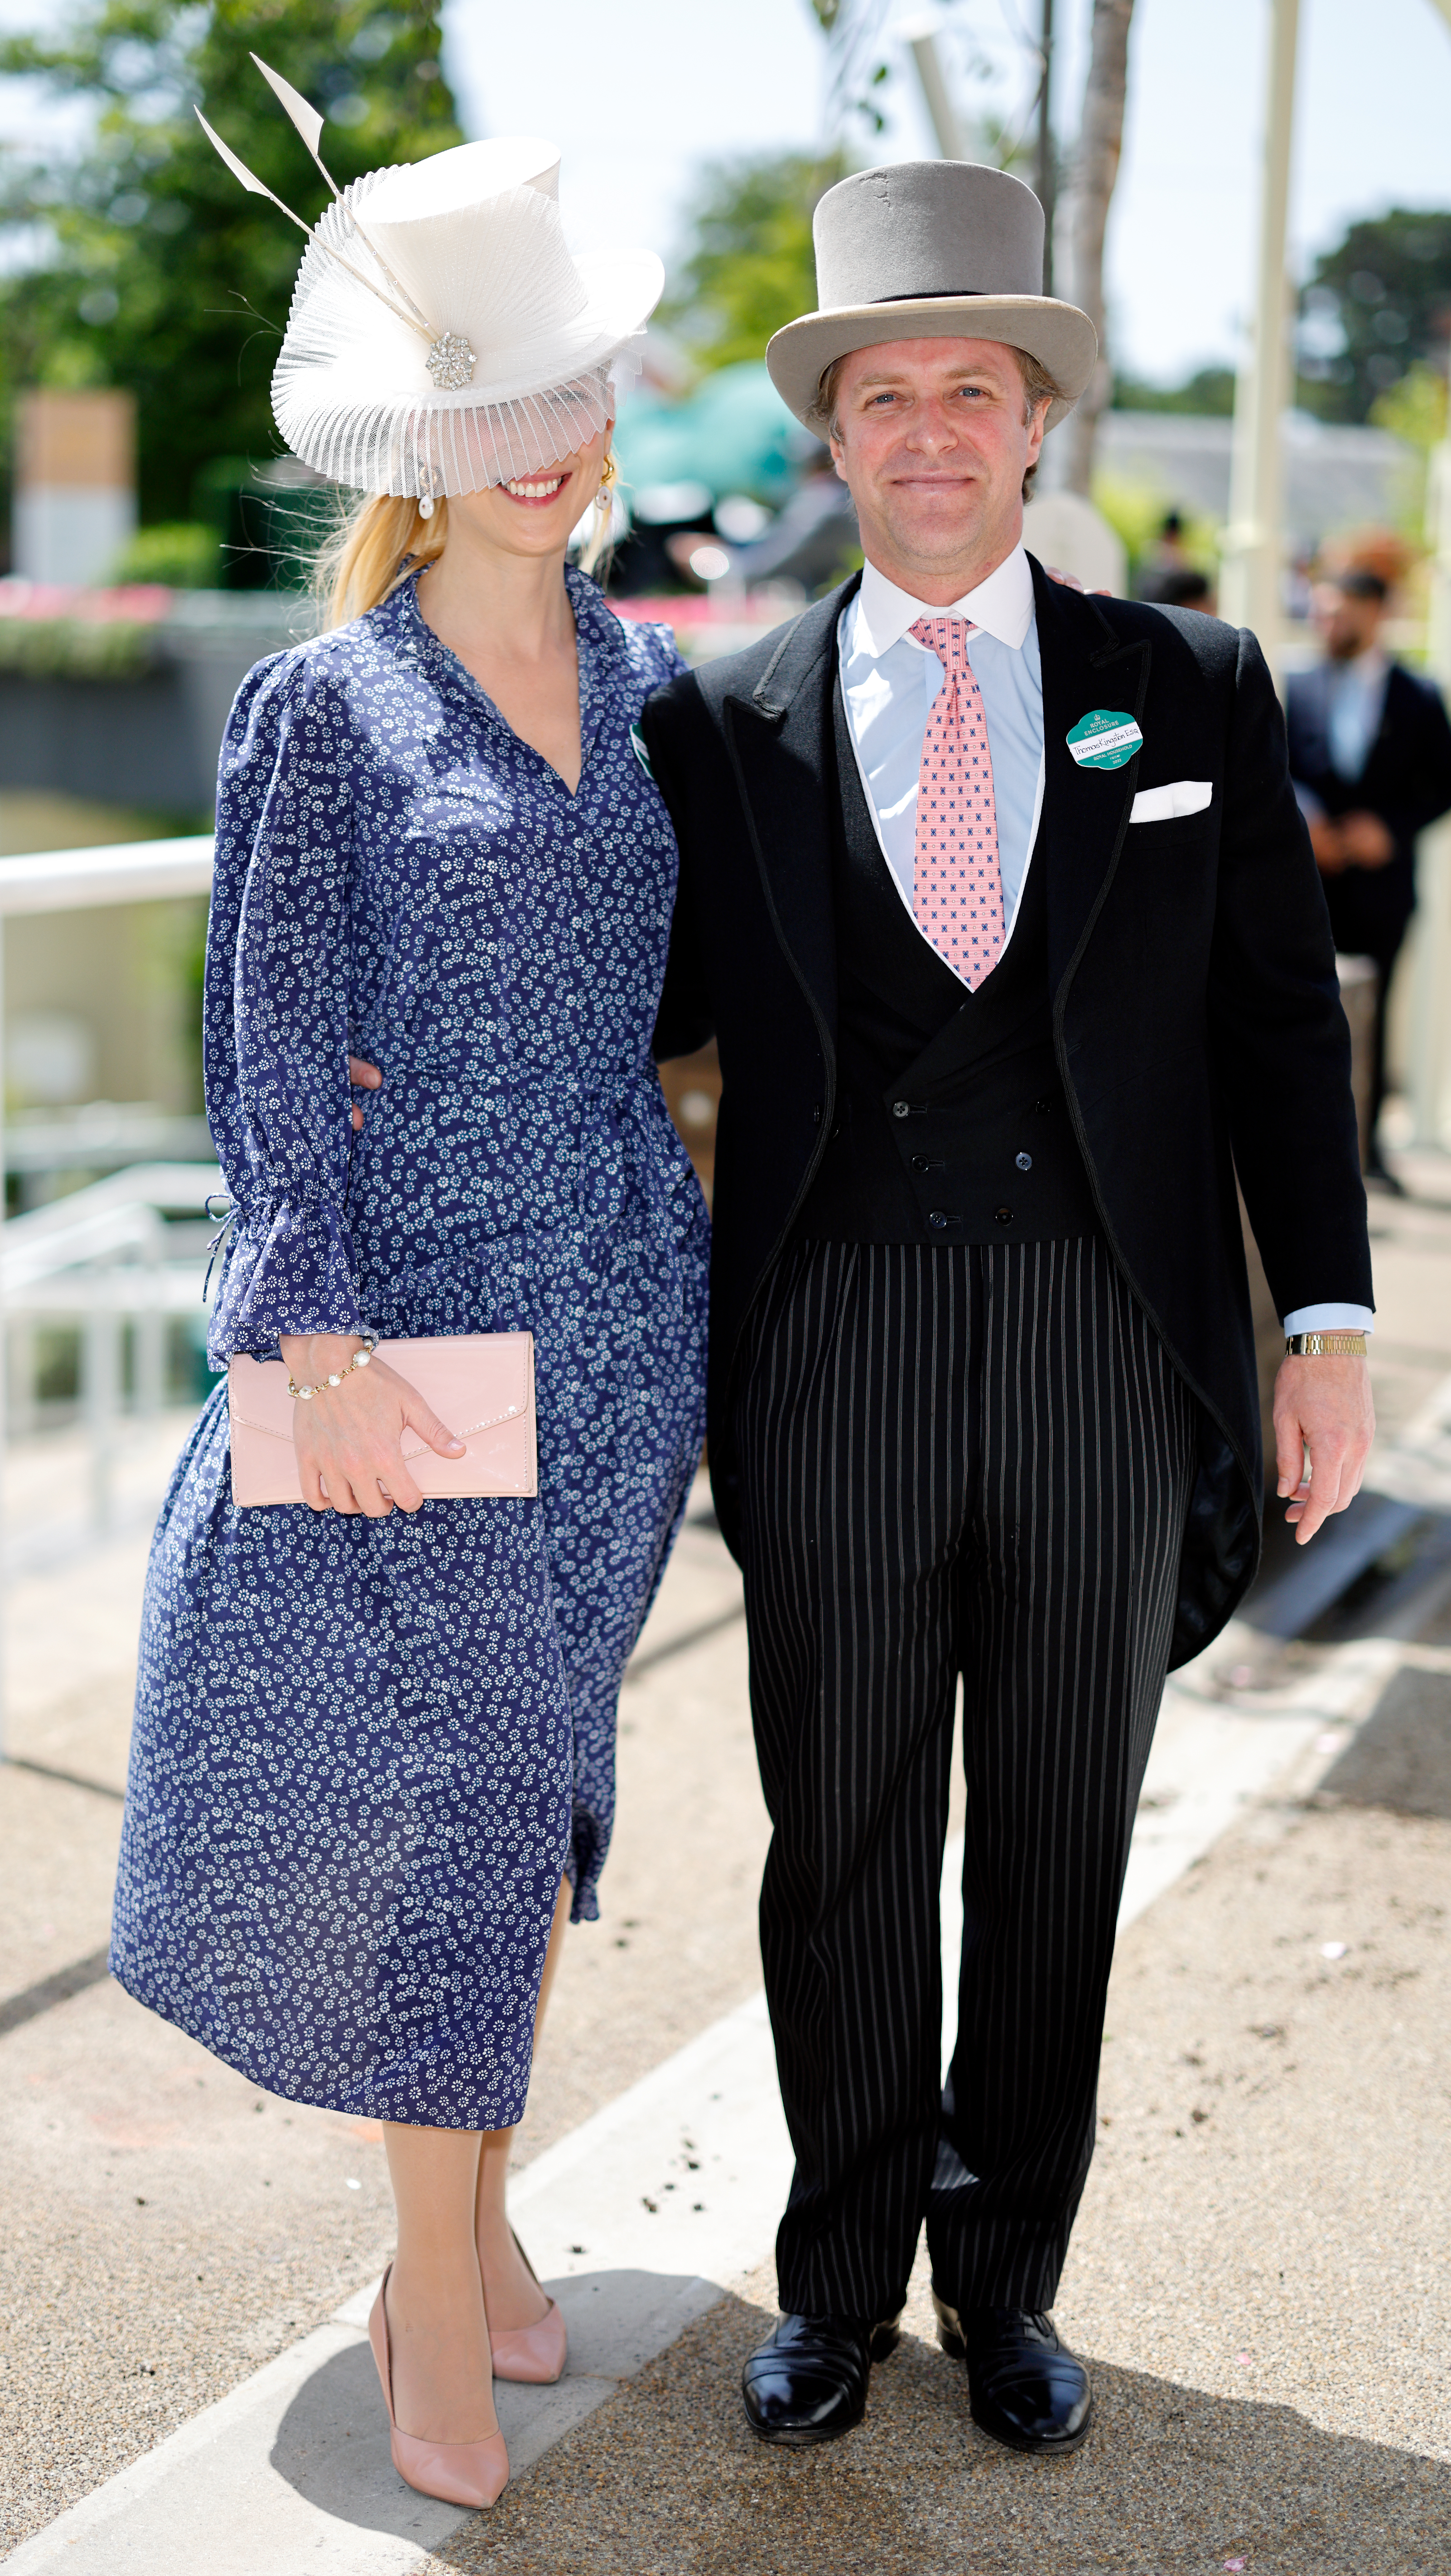 Lady Gabriella and Thomas Kingston at the Royal Ascot in Ascot, England on June 17, 2022 | Source: Getty Images